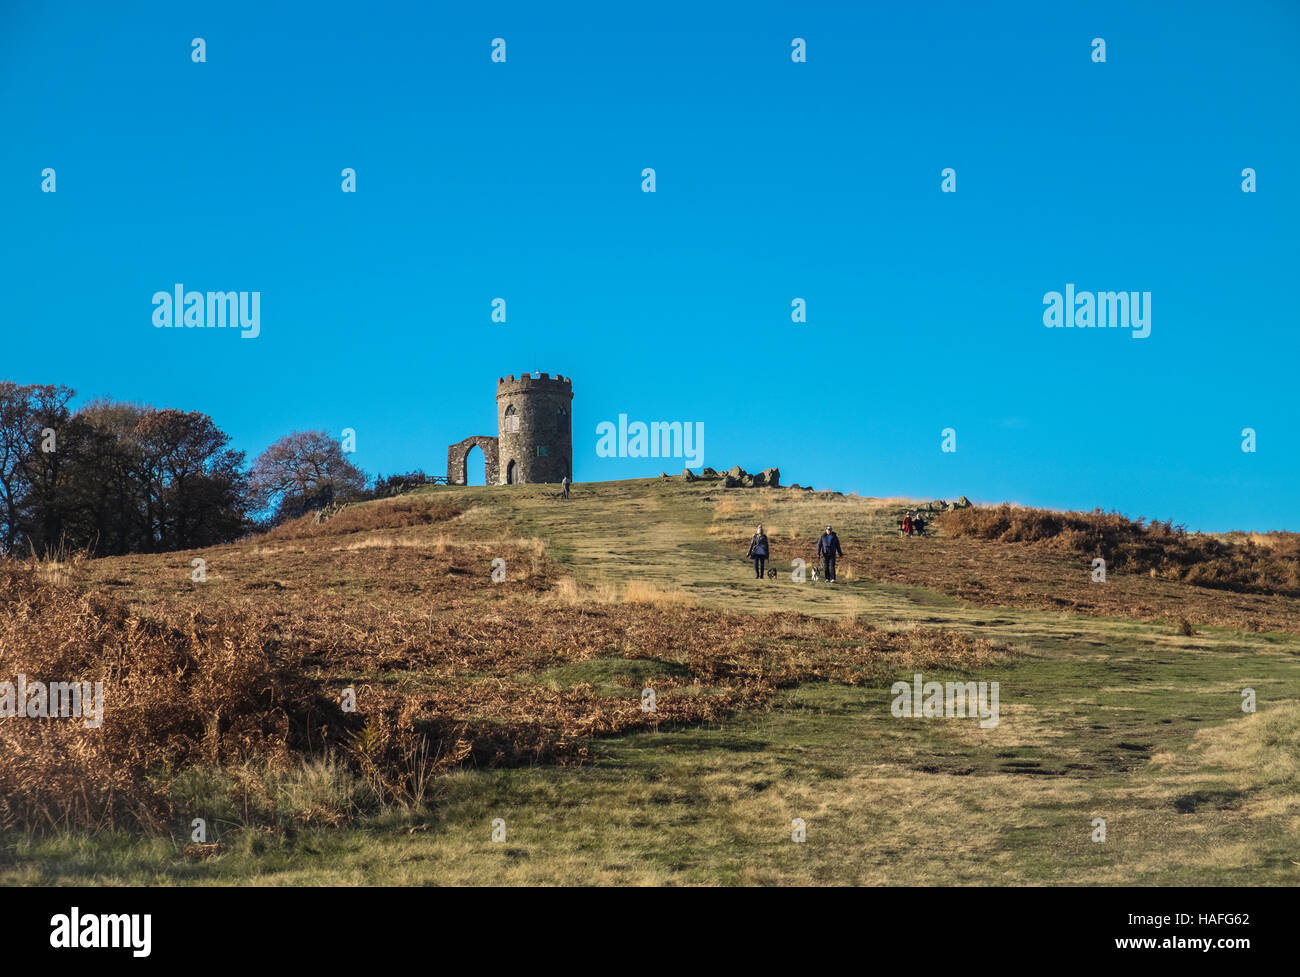 The folly known as 'Old John' is a well known landmark located in Bradgate Park, Leicestershire, UK Stock Photo